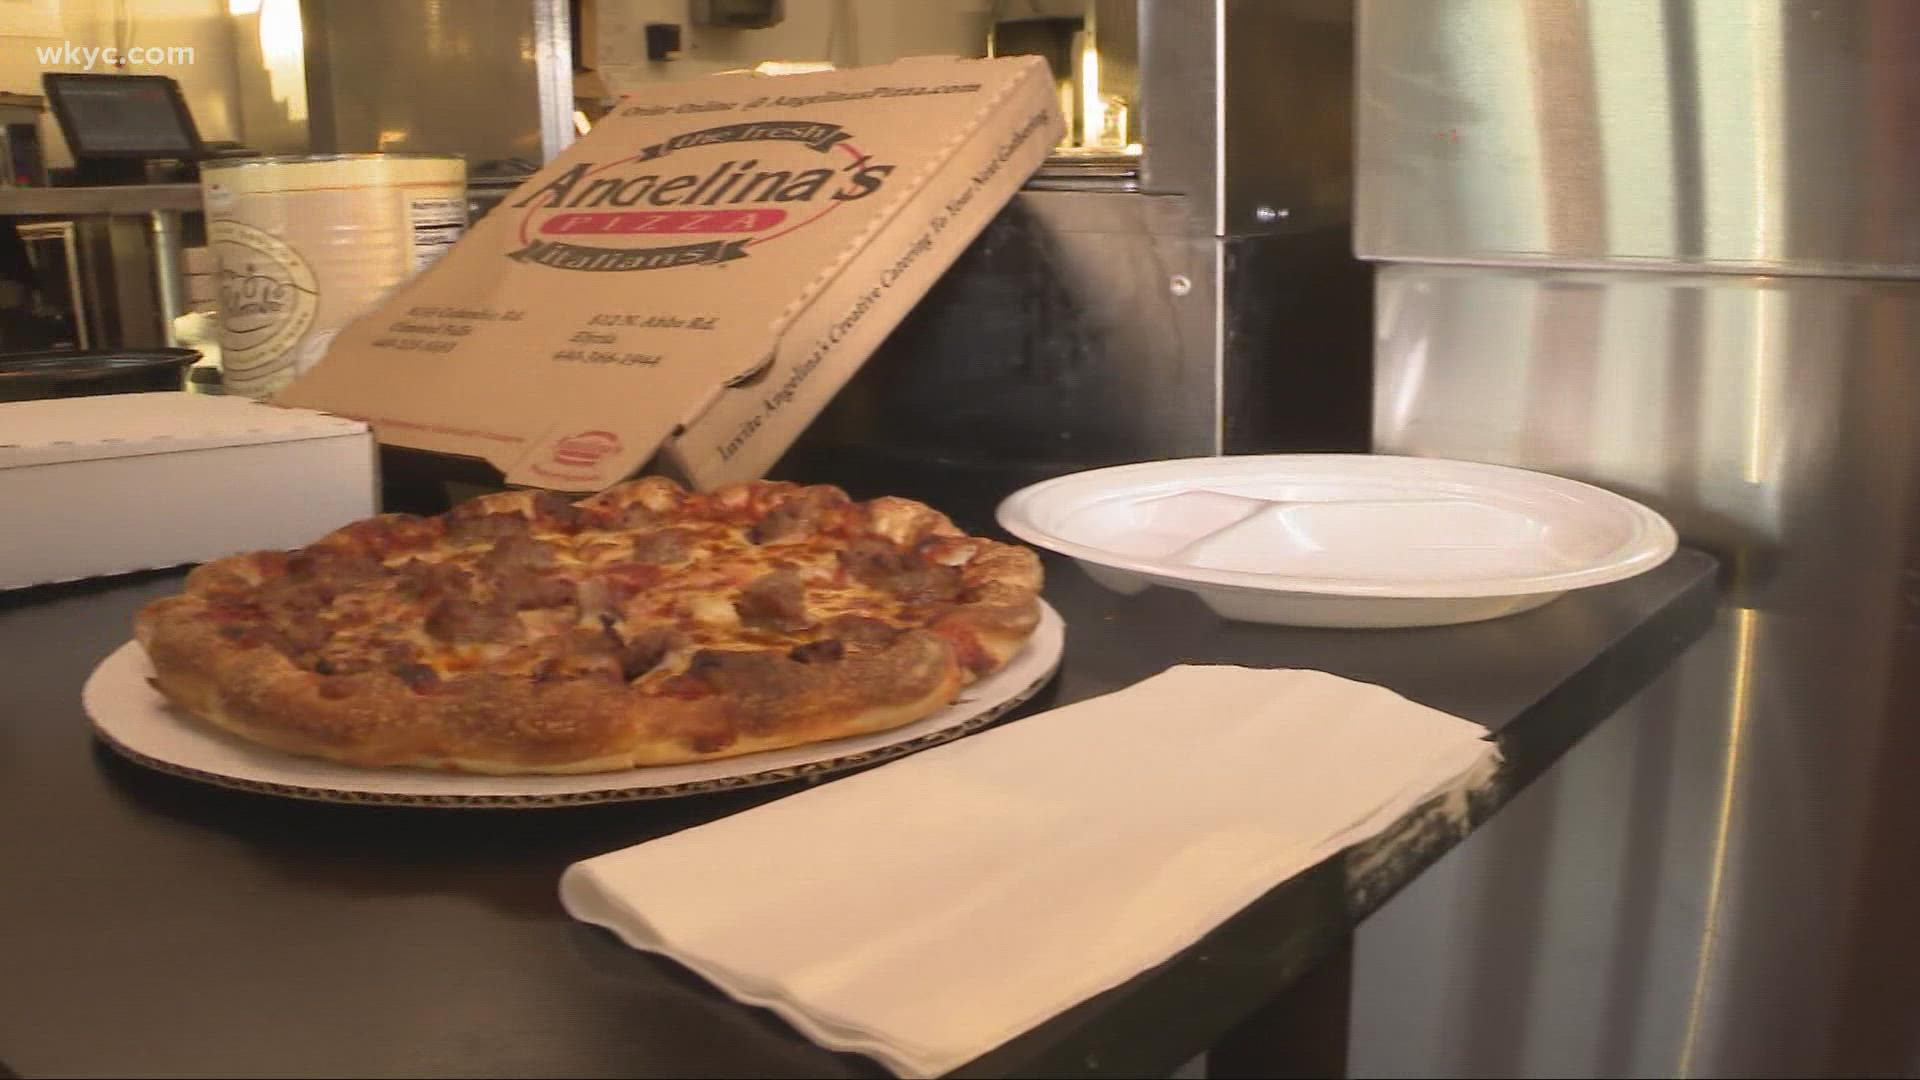 One local pizzeria says important ingredients that keep customers coming back for more are out of stock or are not delivering.